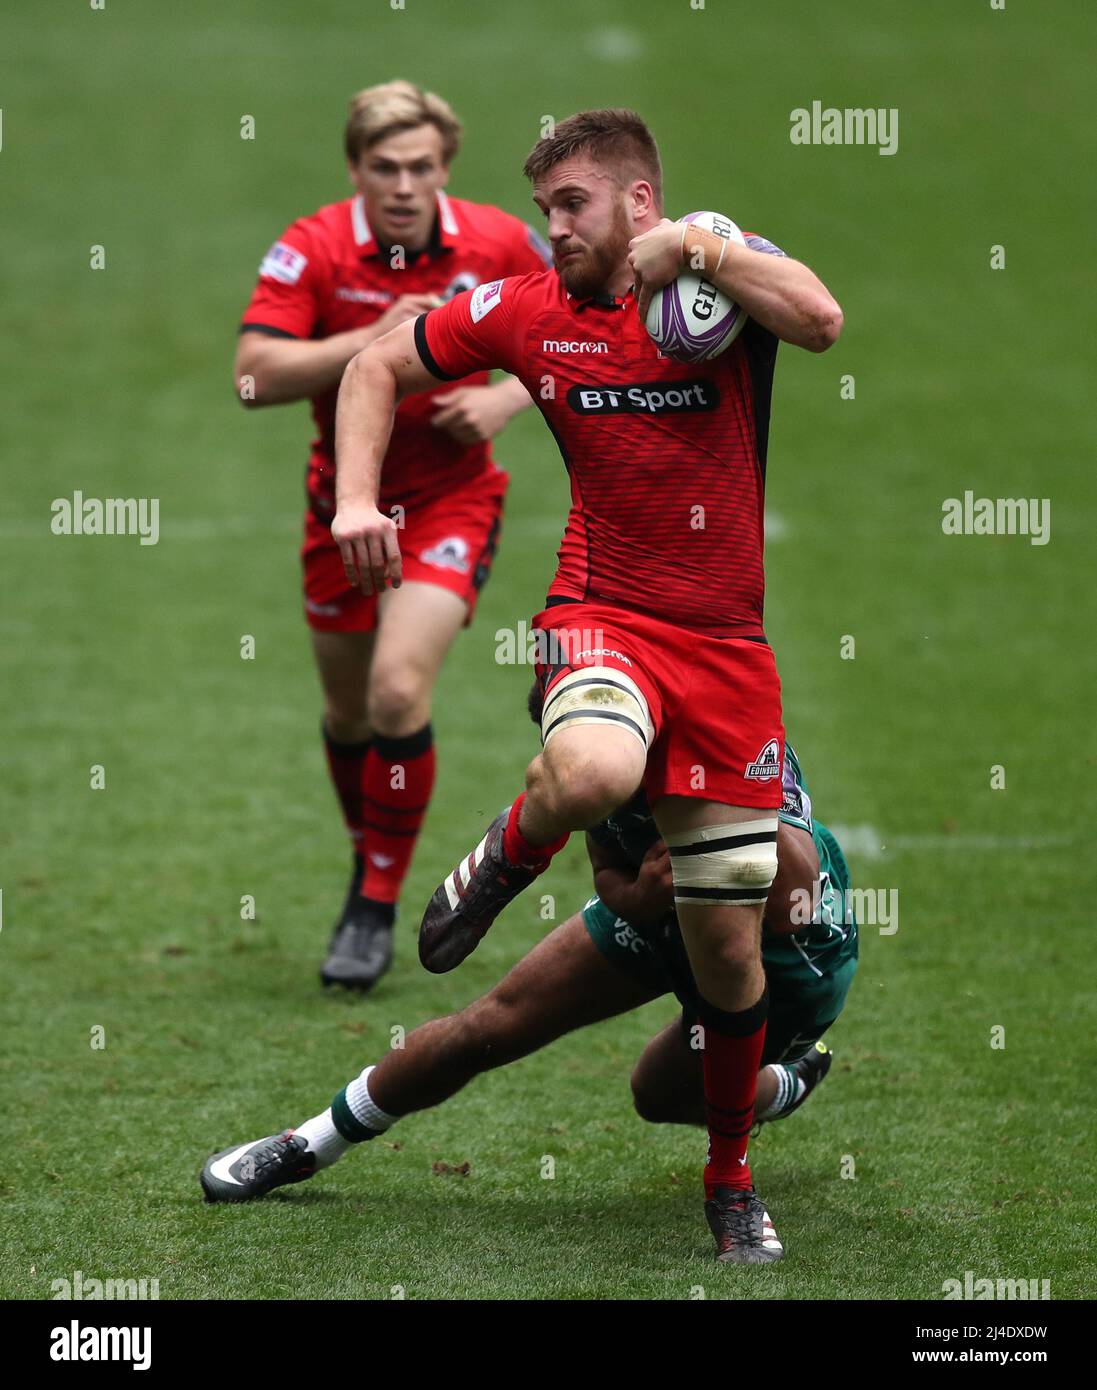 File photo dated 14-10-2017 of Edinburgh Rugby's Luke Crosbie (right) breaking away to score a try. Scotland international Luke Crosbie has signed a new contract with Edinburgh ahead of his comeback from injury. Issue date: Thursday April 14, 2022. Stock Photo